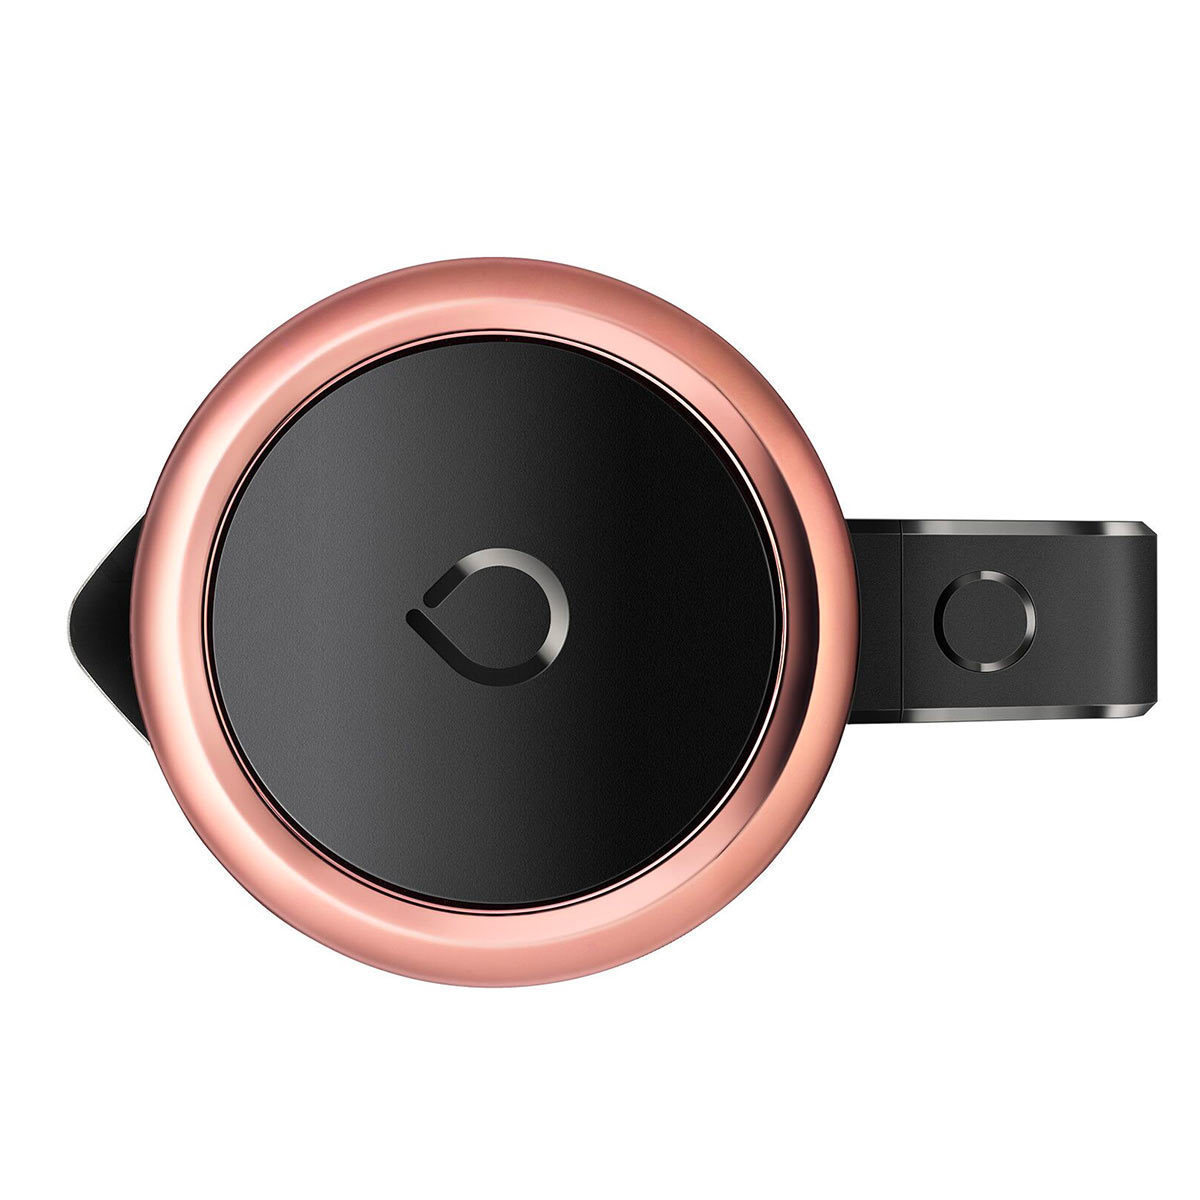 Smarter iKettle Wi-Fi Controlled Kettle in White & Rose Gold